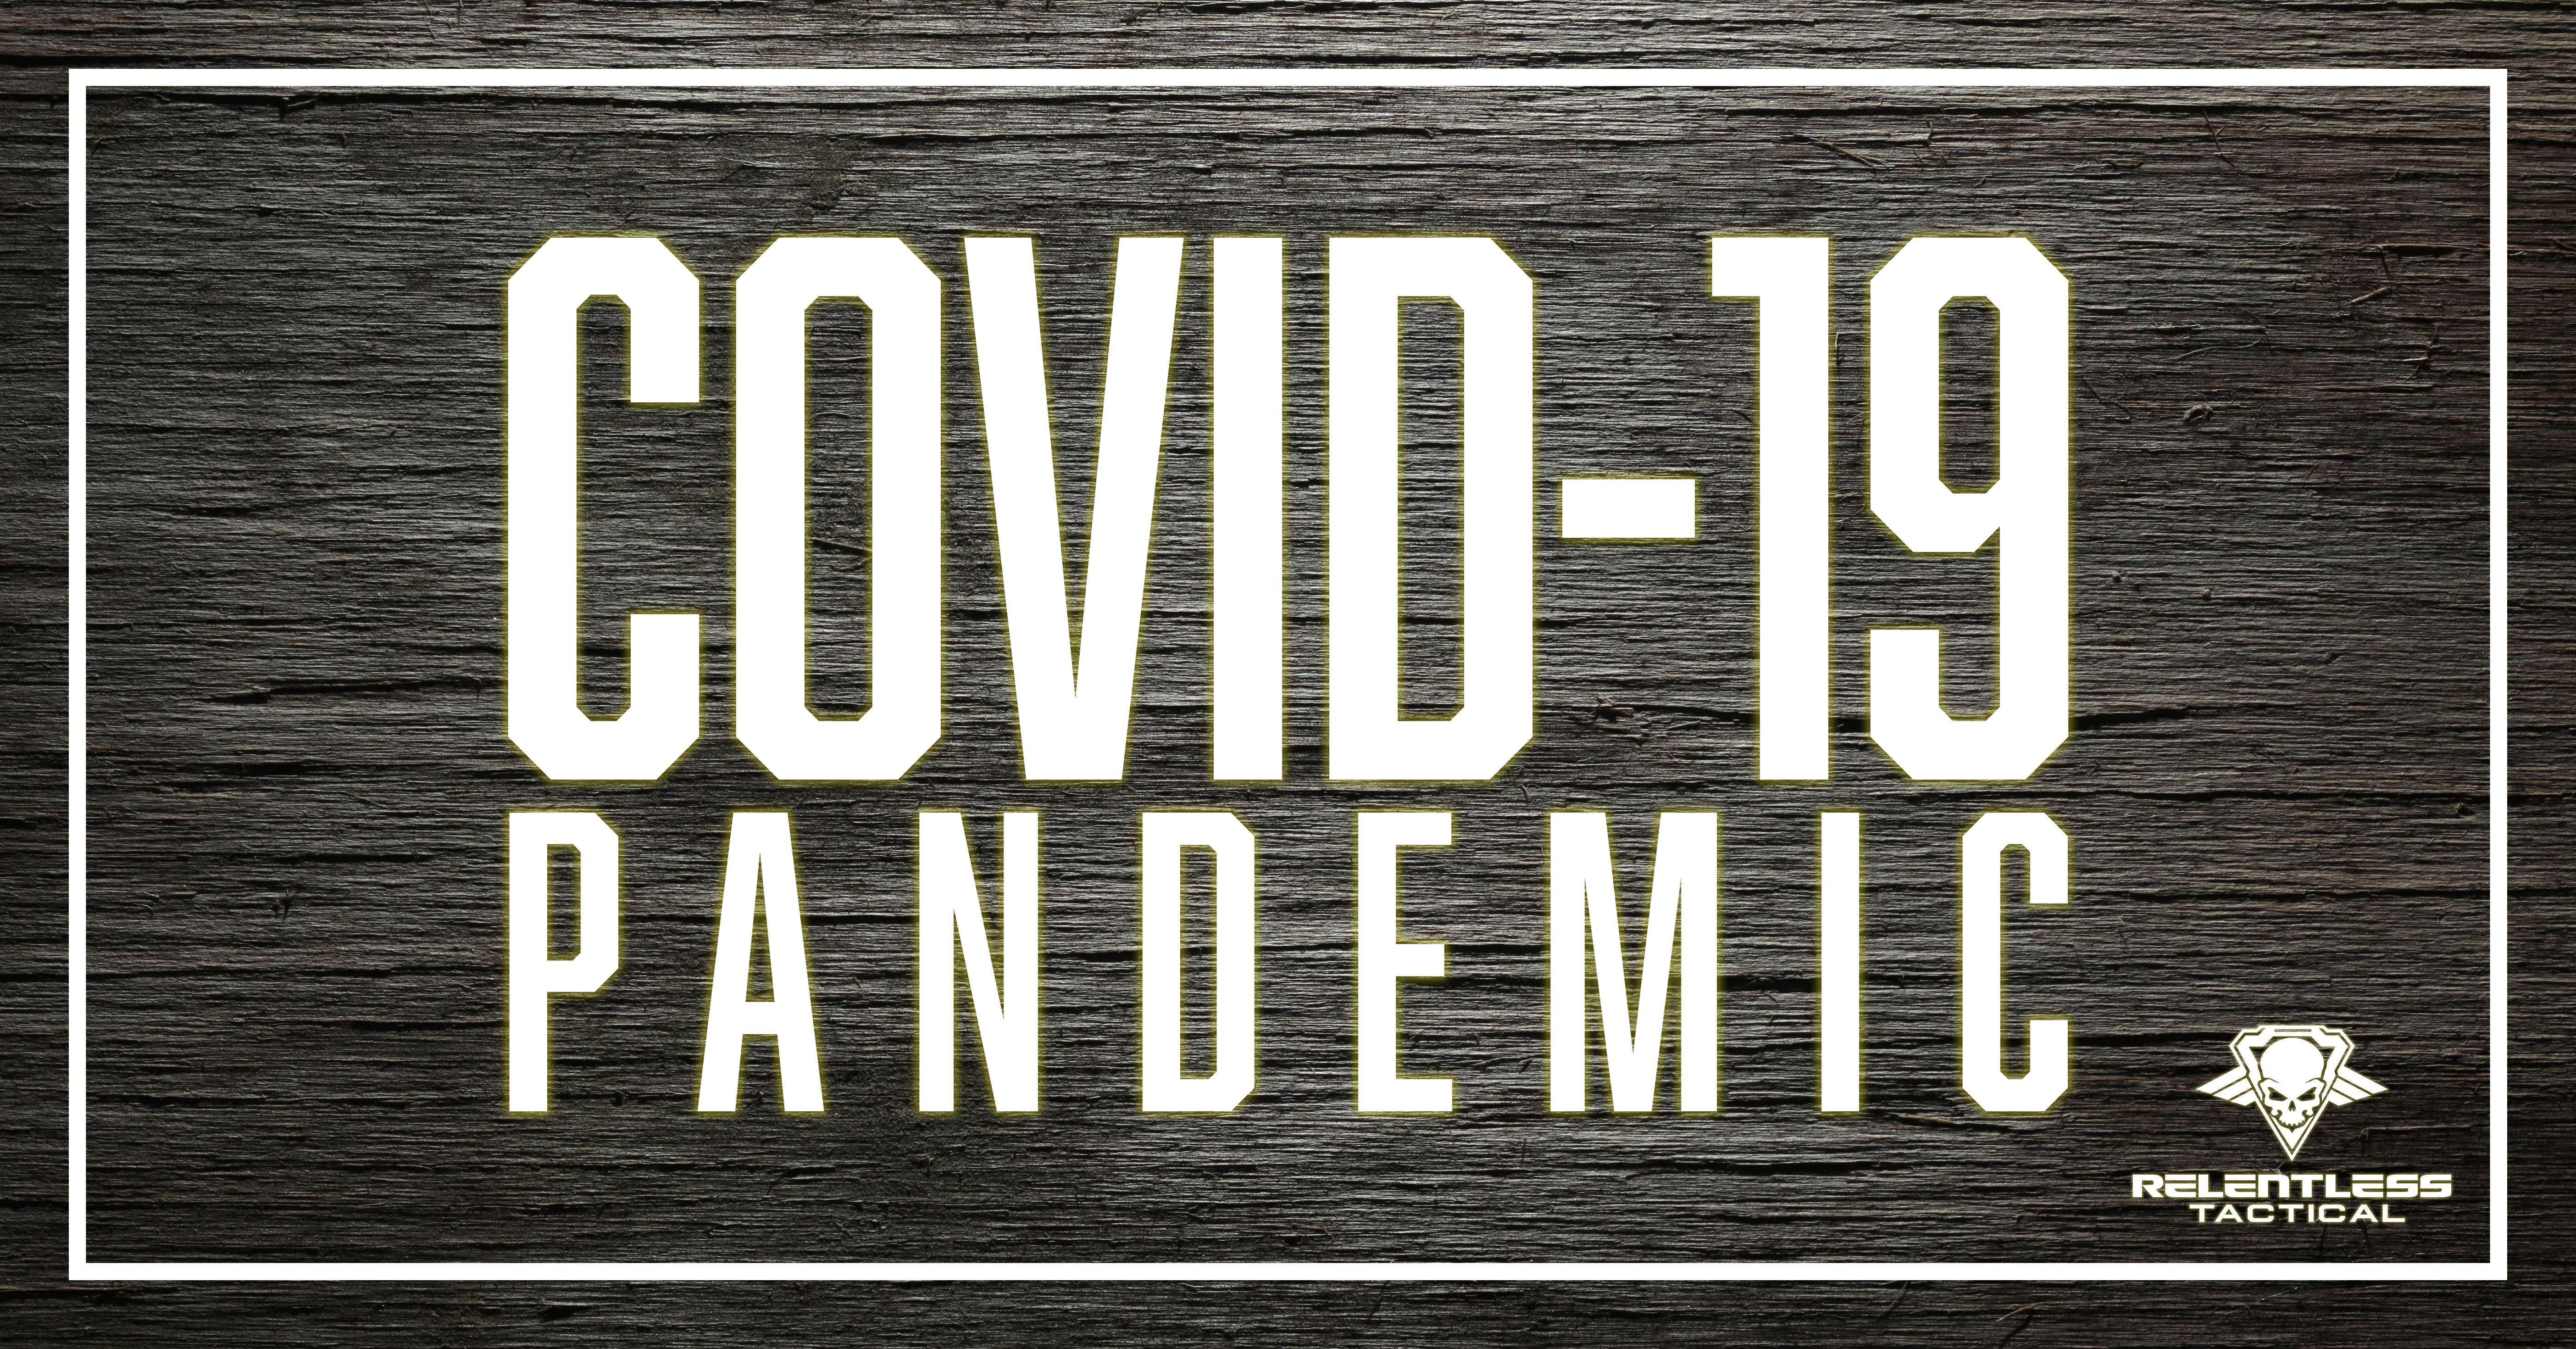 Our Response the the COVID-19 Pandemic